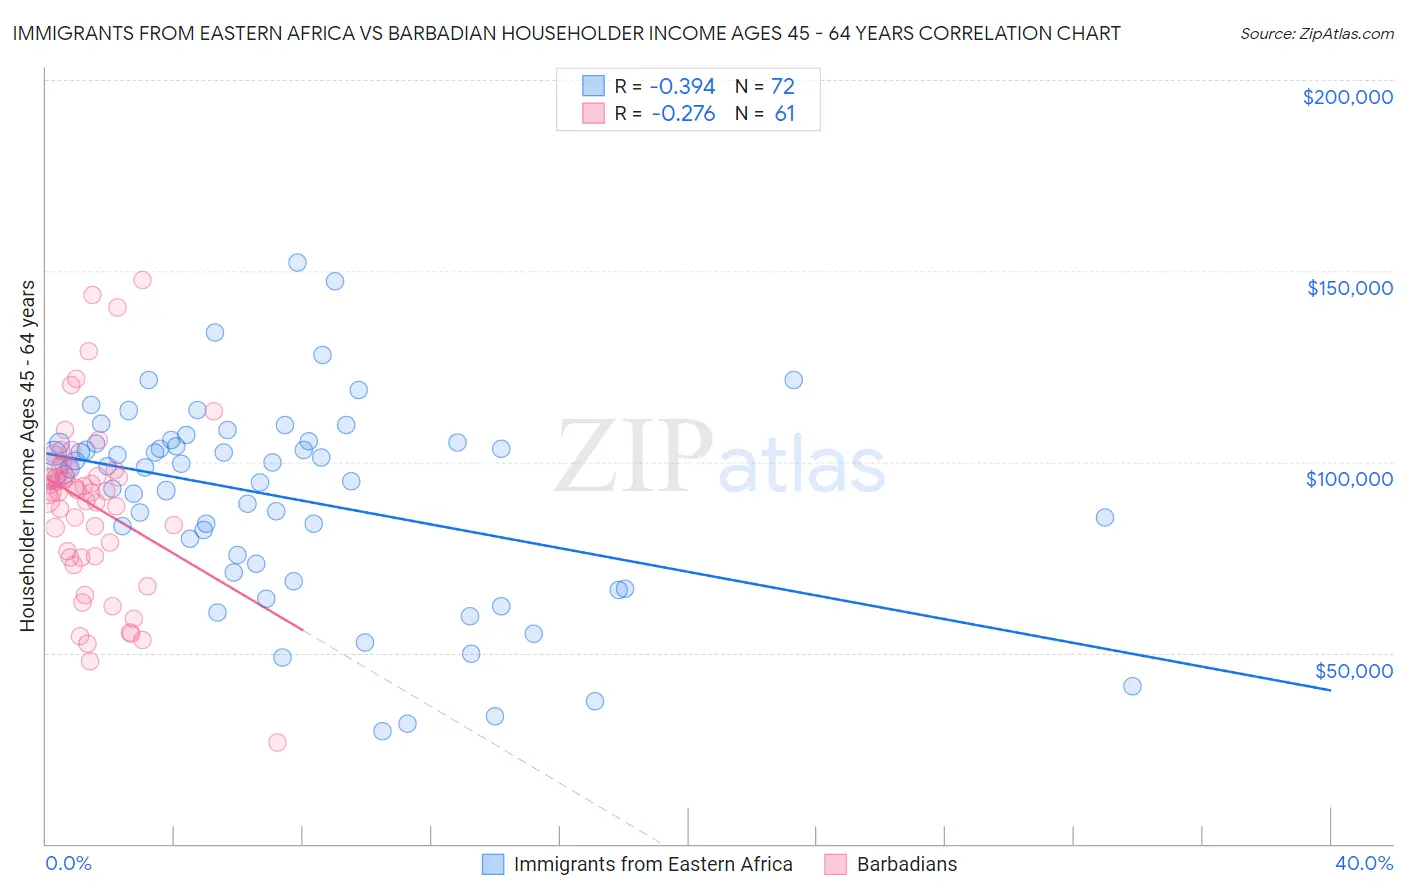 Immigrants from Eastern Africa vs Barbadian Householder Income Ages 45 - 64 years